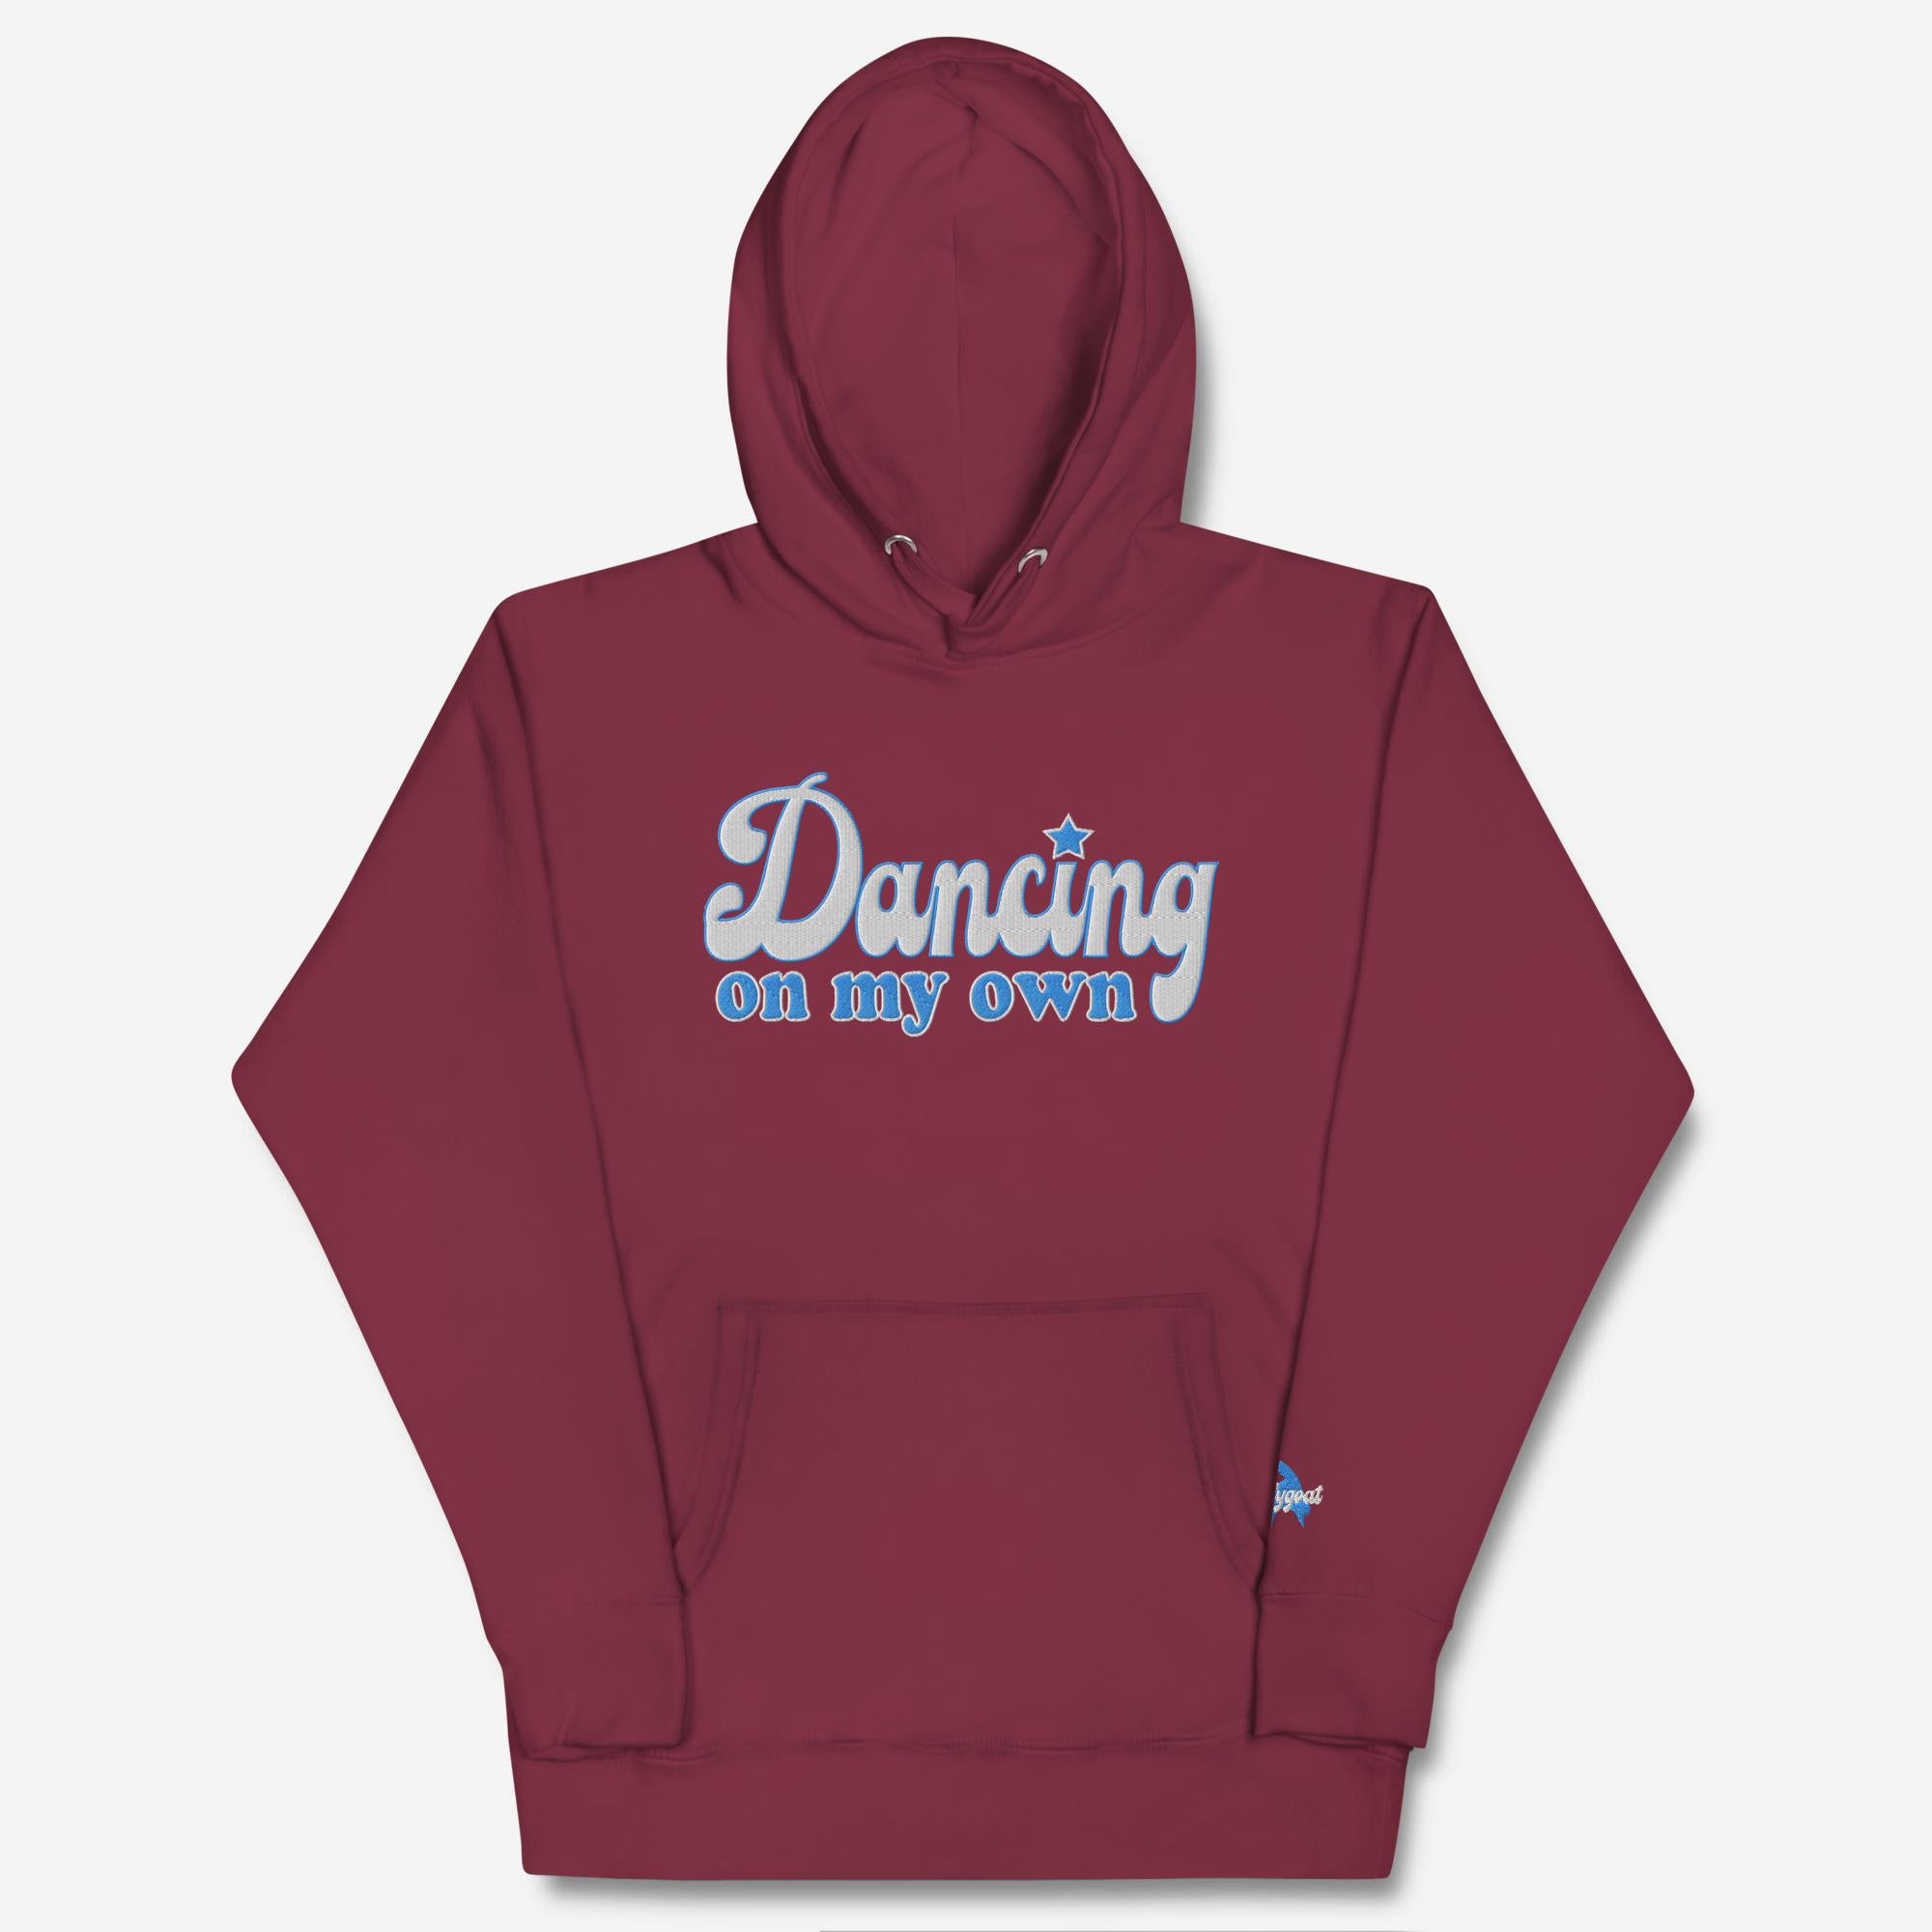 "Dancing On My Own" Embroidered Hoodie